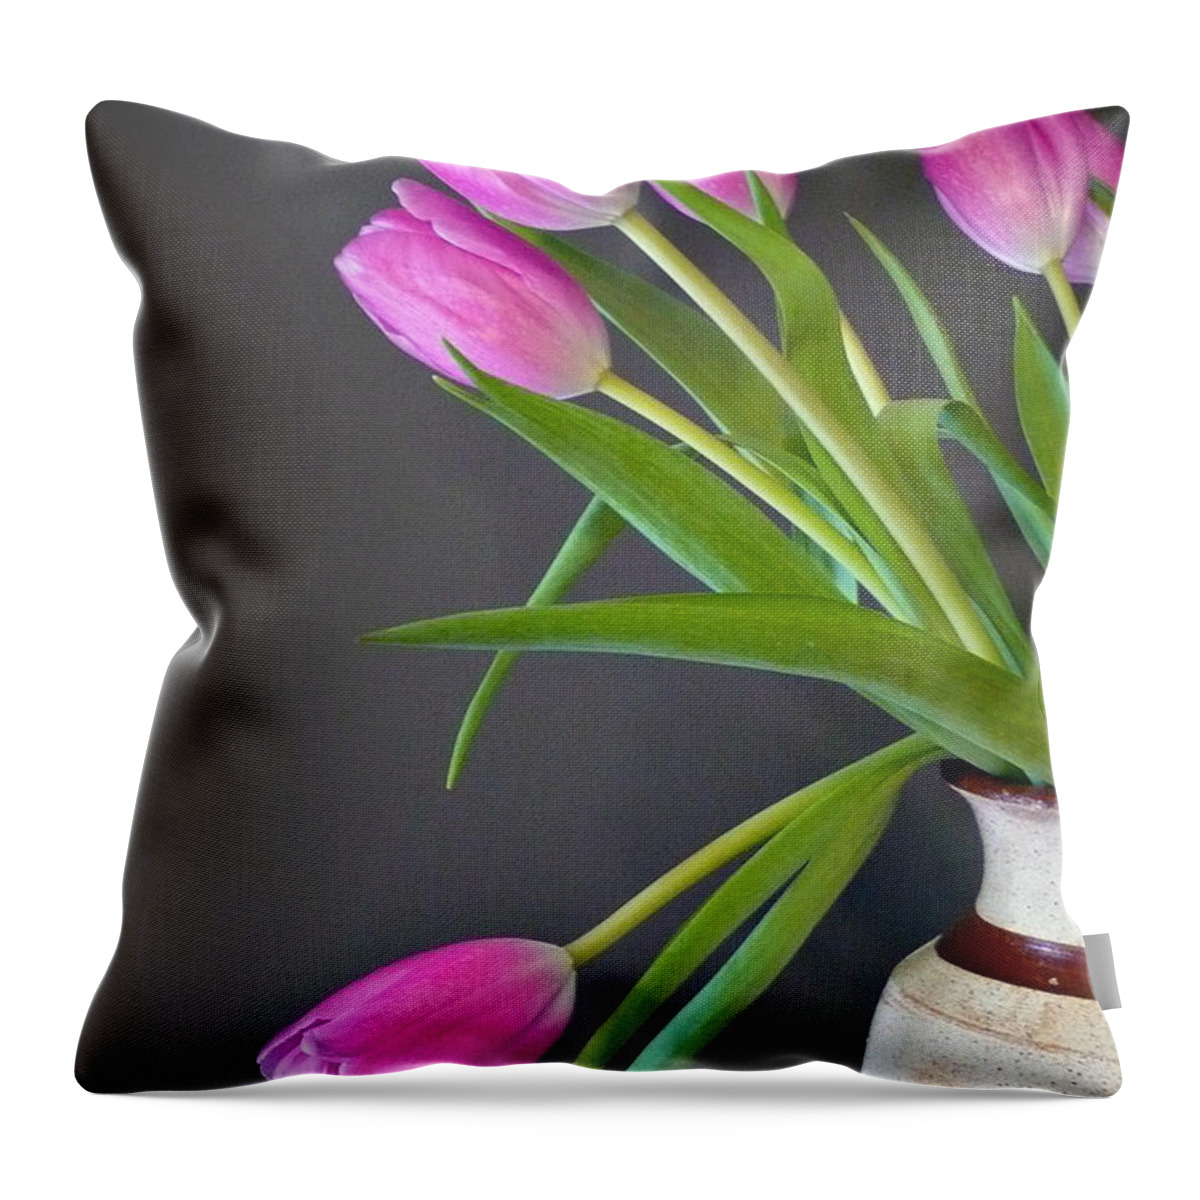 Pink Tulips Throw Pillow featuring the photograph Five Pink Tulips in a Vase. by Jacqueline Milner